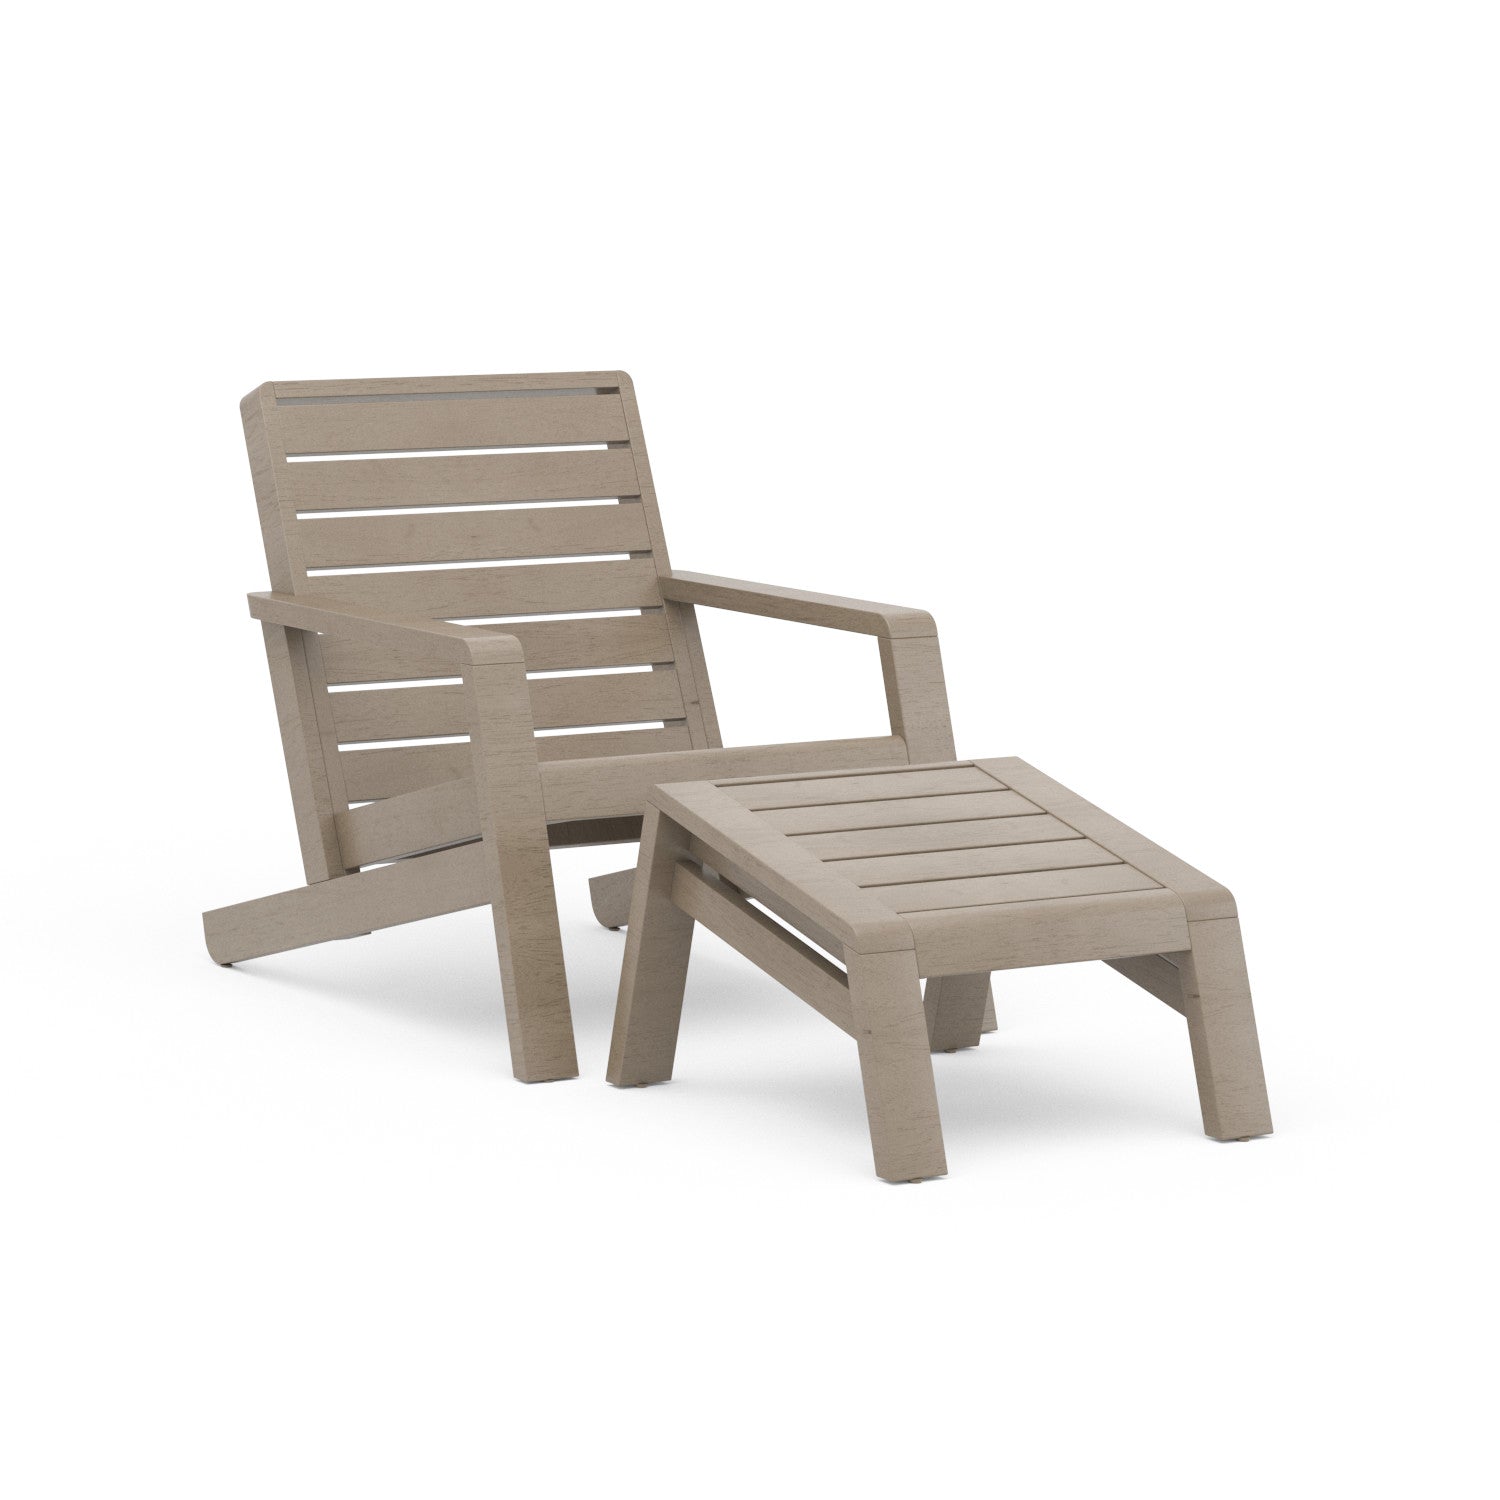 Sustain Outdoor Lounge Chair with Ottoman by Homestyles - Gray - Wood - 5675-12-90